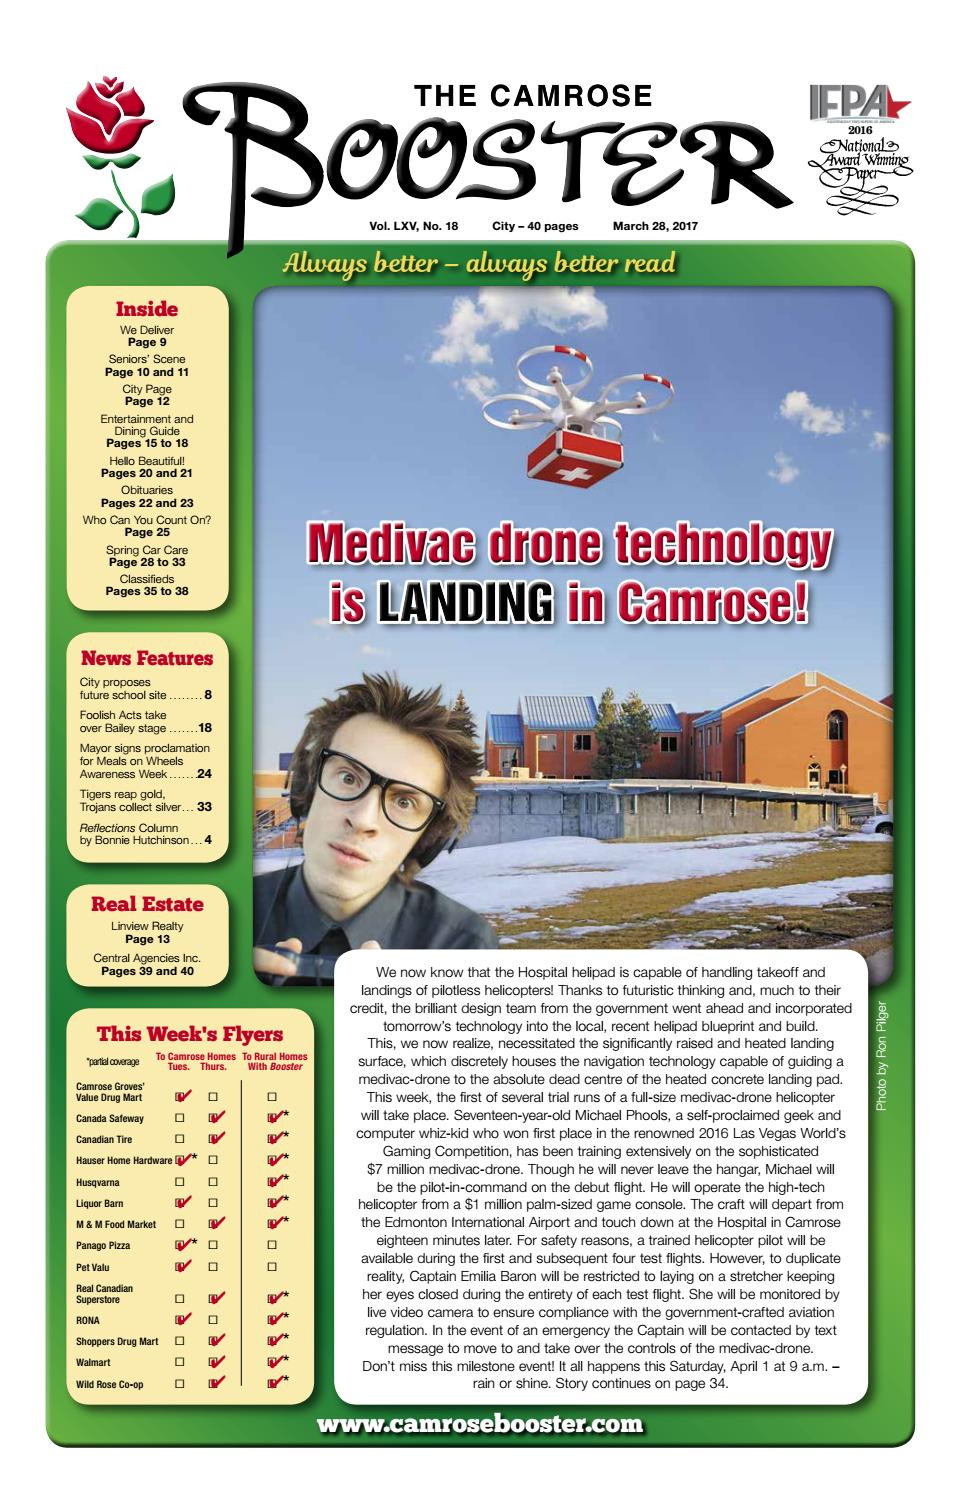 hardwood flooring barrie of march 28 2017 camrose booster by the camrose booster issuu regarding page 1